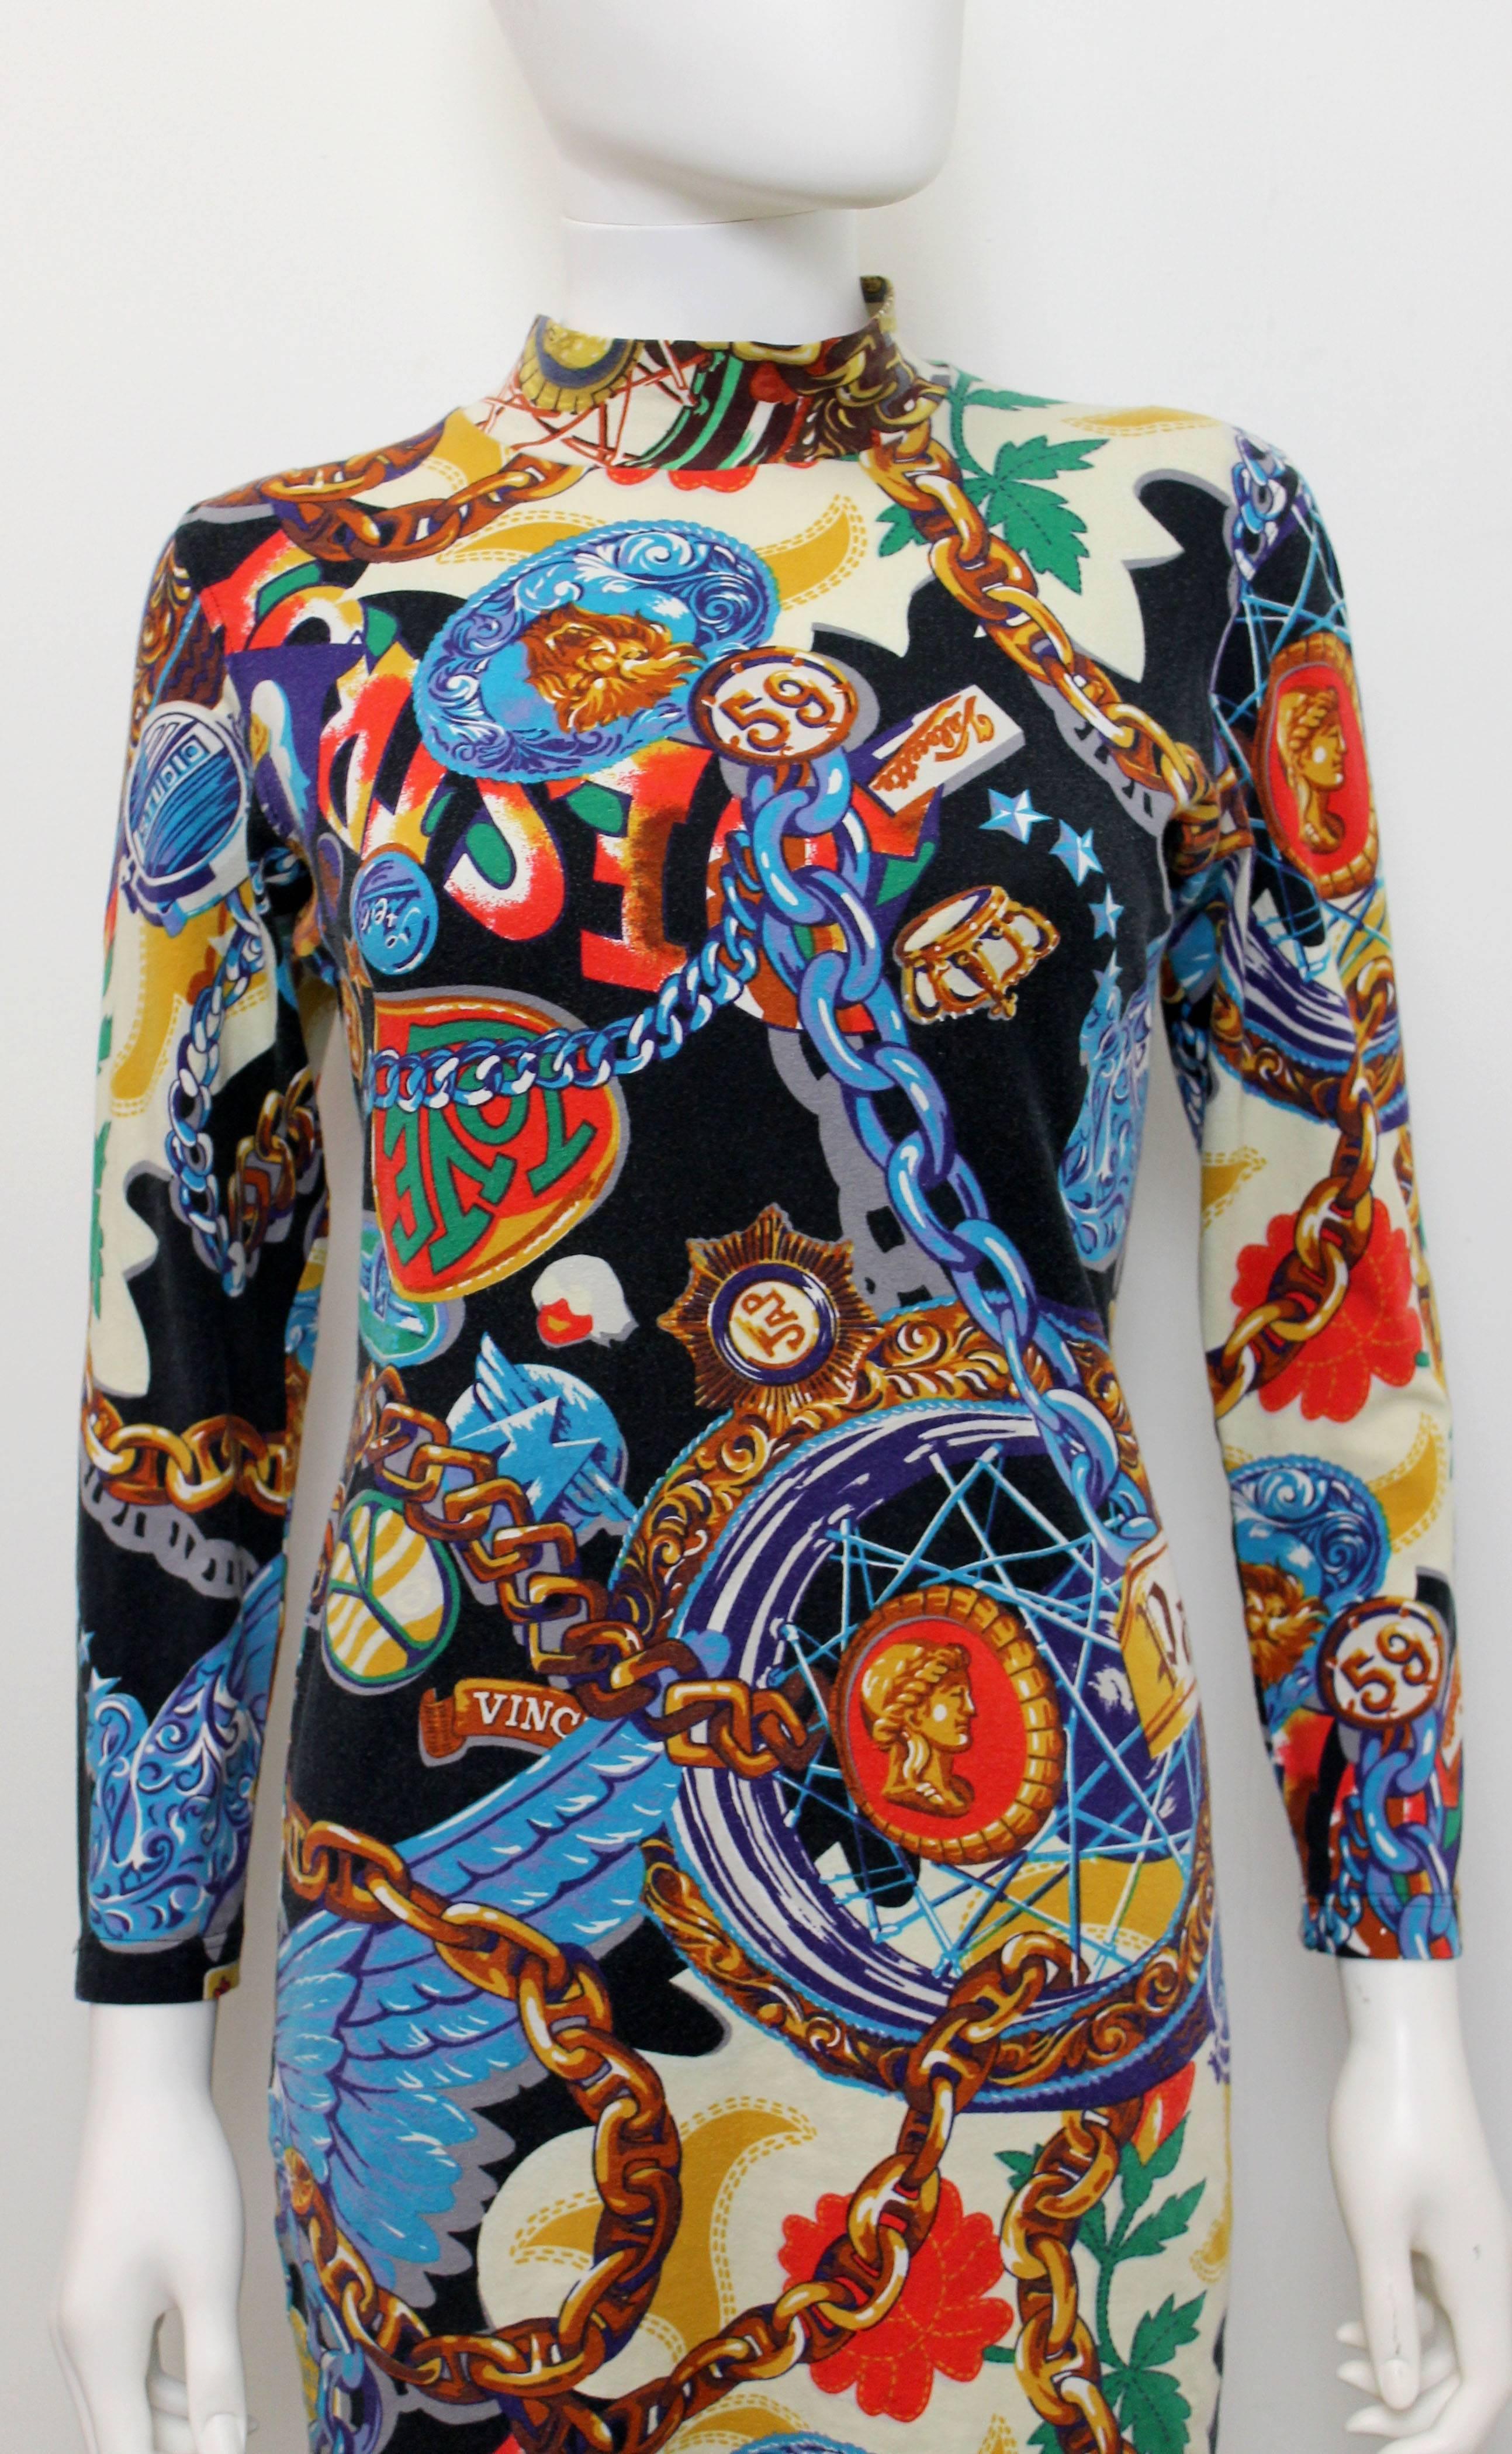 This dress from Kenzos ‘Jungle’ line dates to the late 1980s. The dress features a vibrant contrasting colour palette print featuring police badges, cars, baroque motifs, necklaces, flowers, text and ducks. 
This dress is a great interesting and